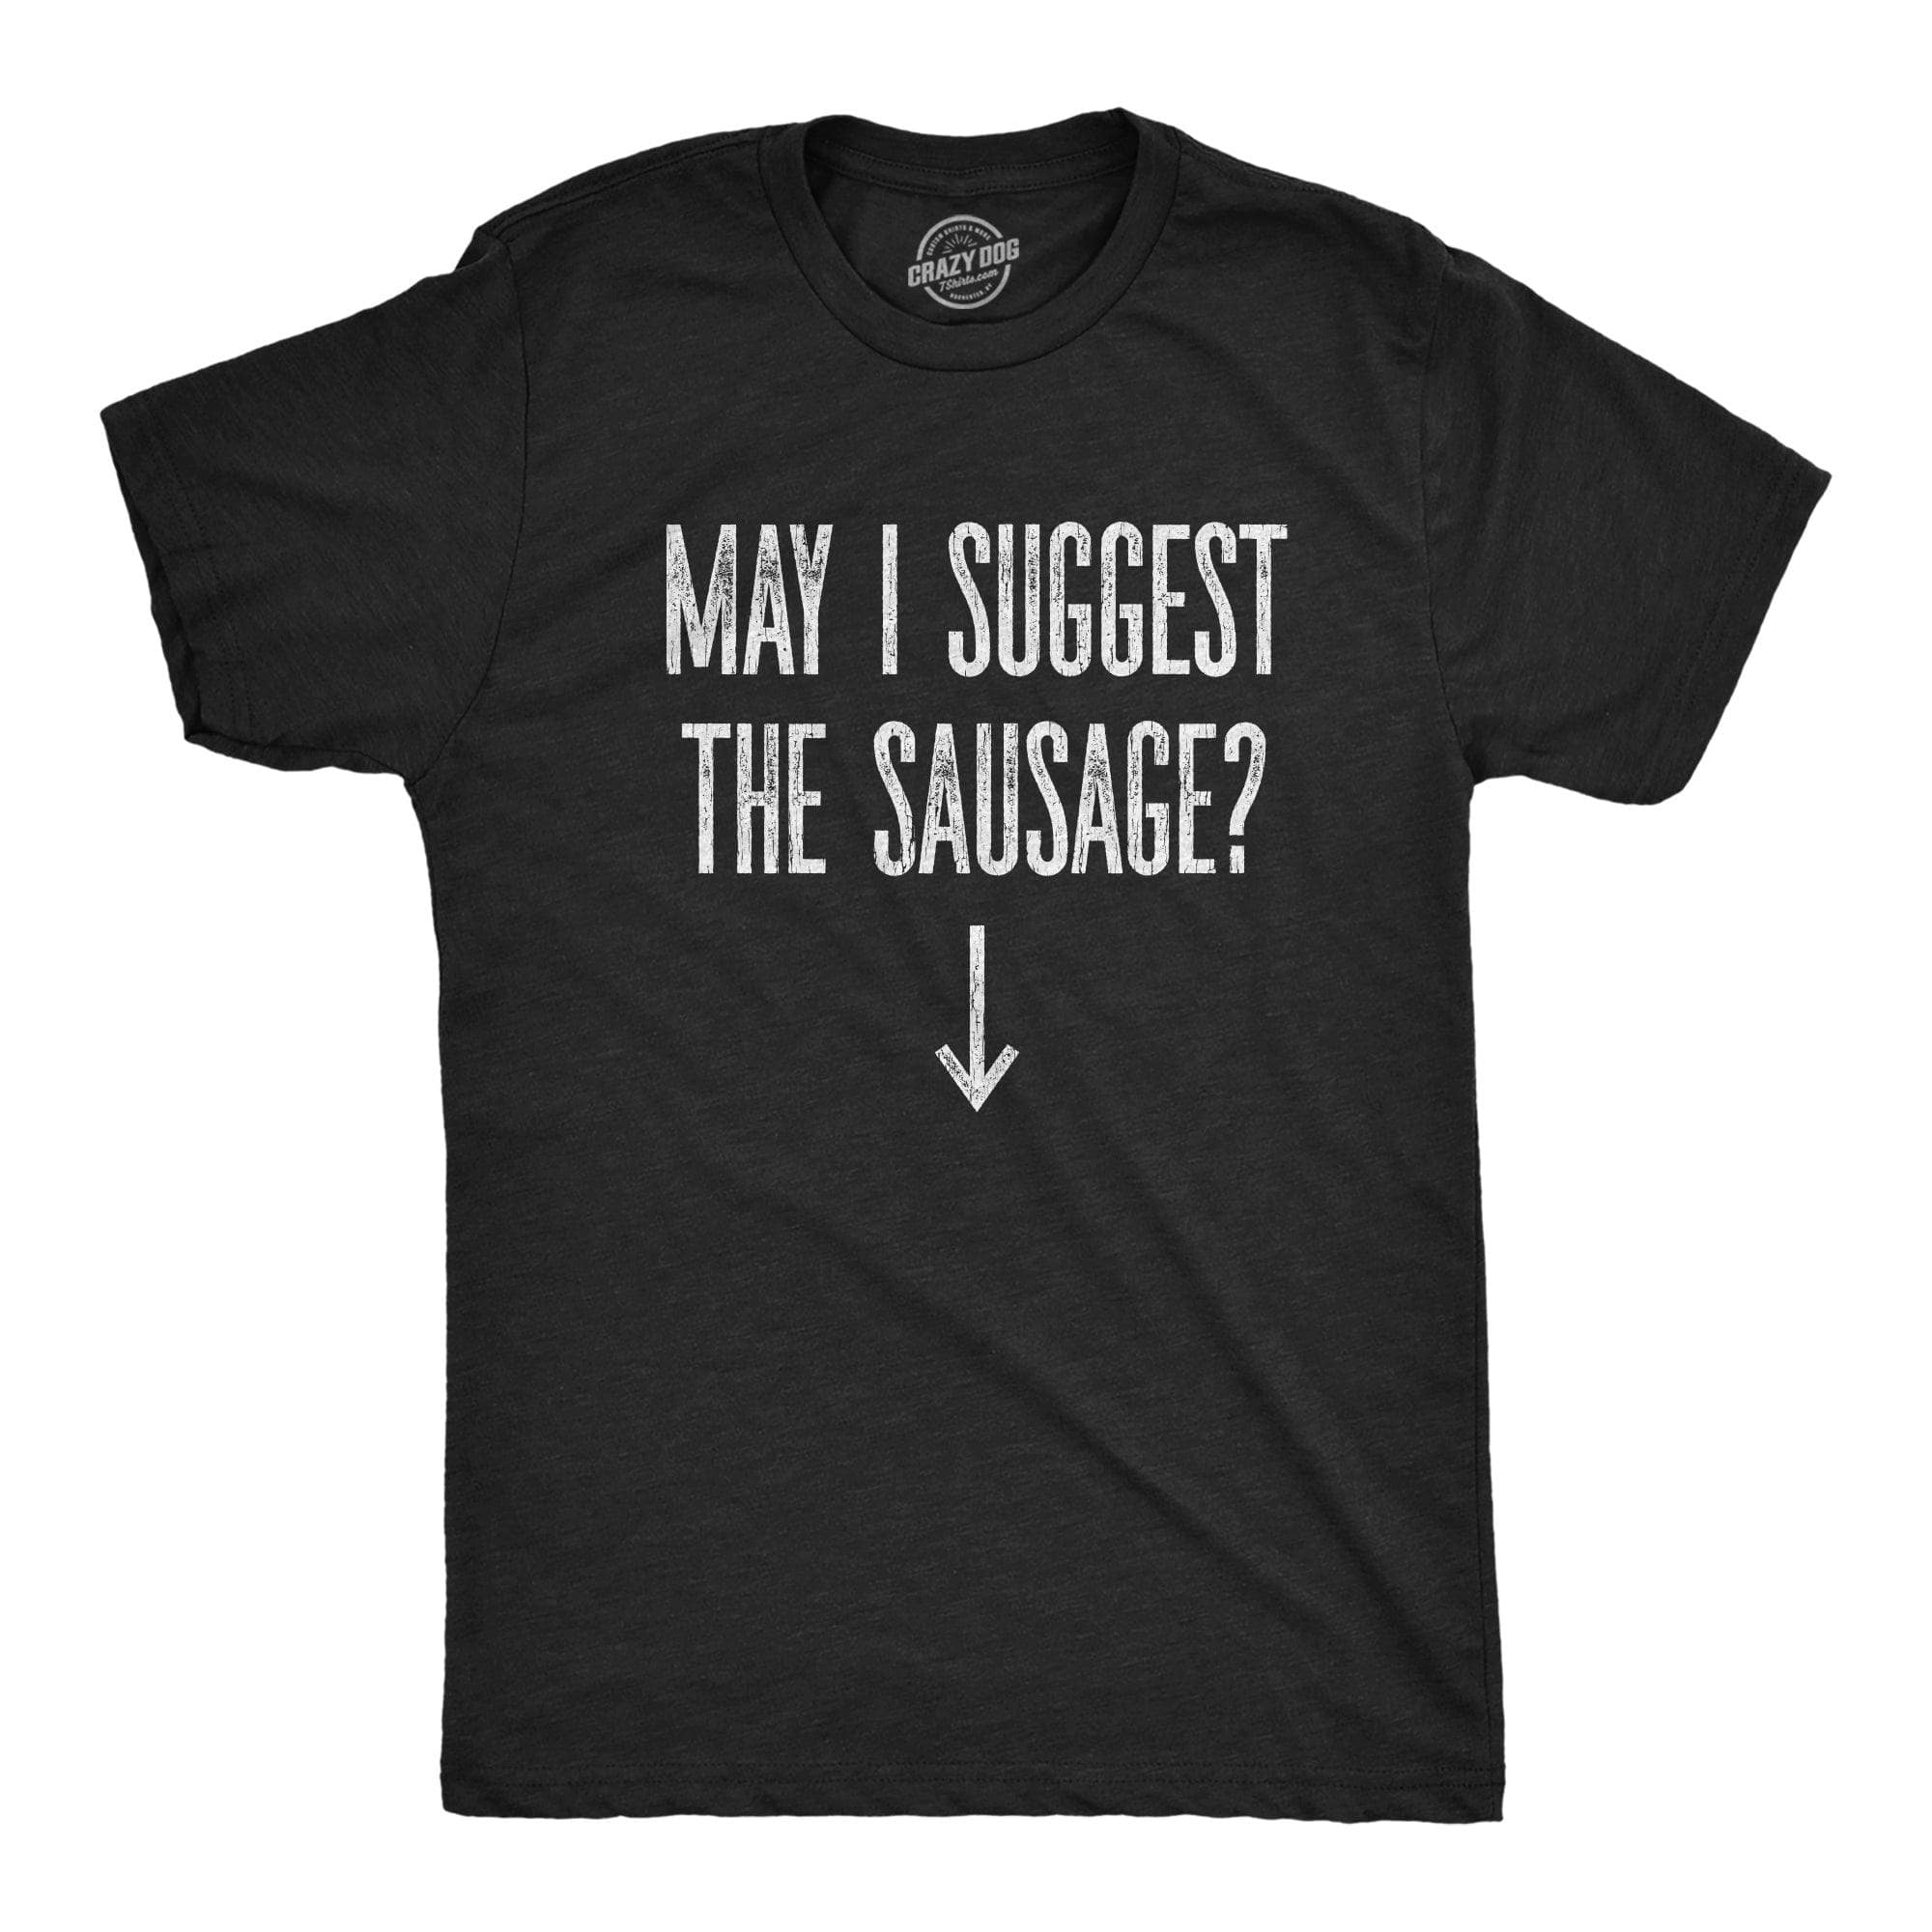 May I Suggest The Sausage? Men's Tshirt  -  Crazy Dog T-Shirts